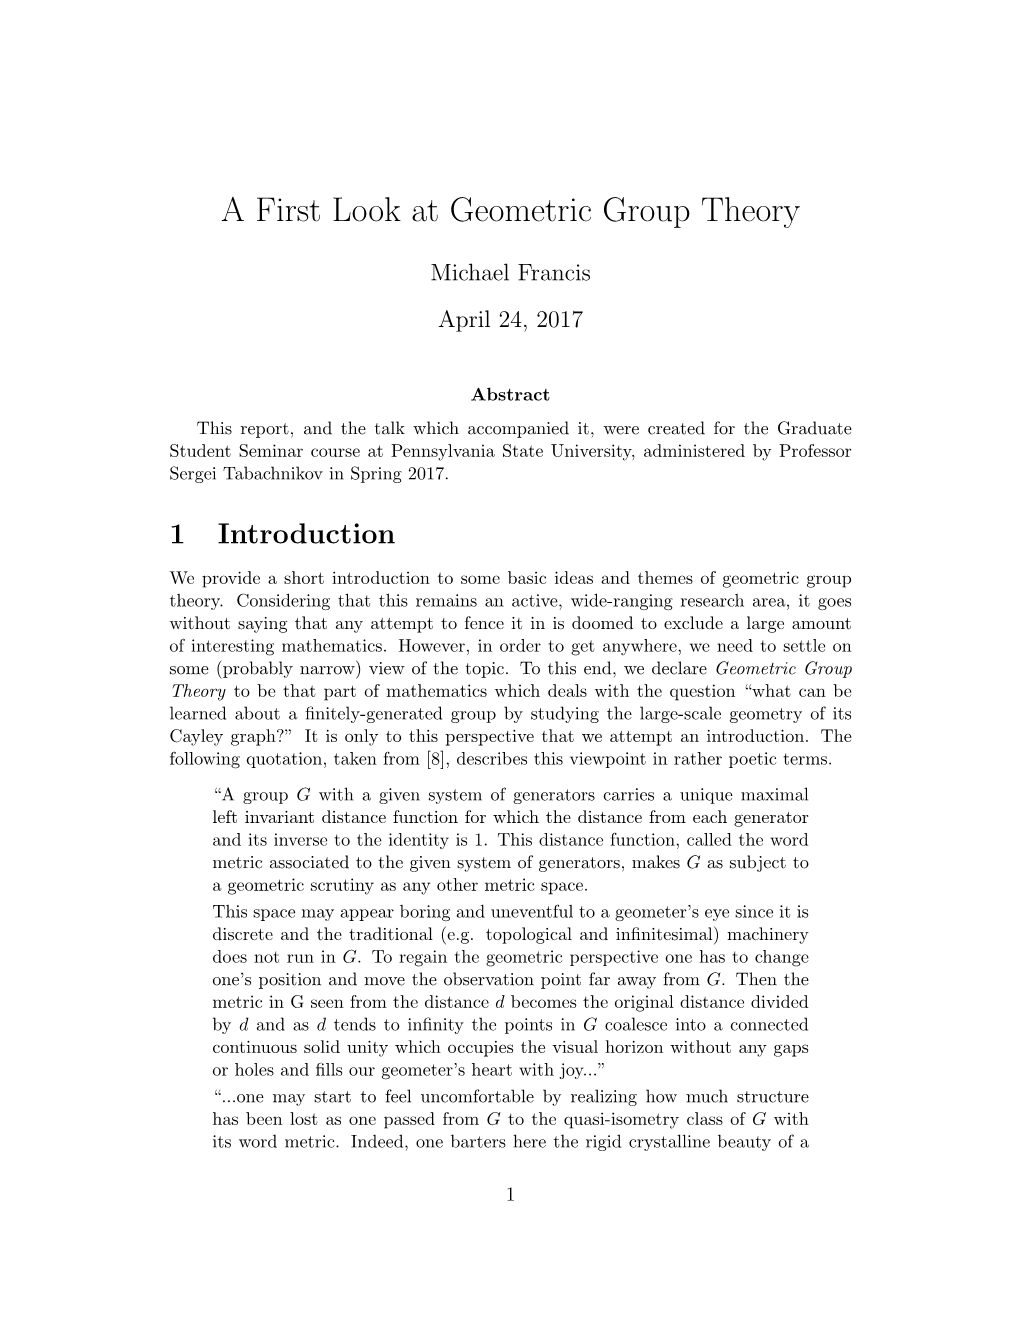 A First Look at Geometric Group Theory